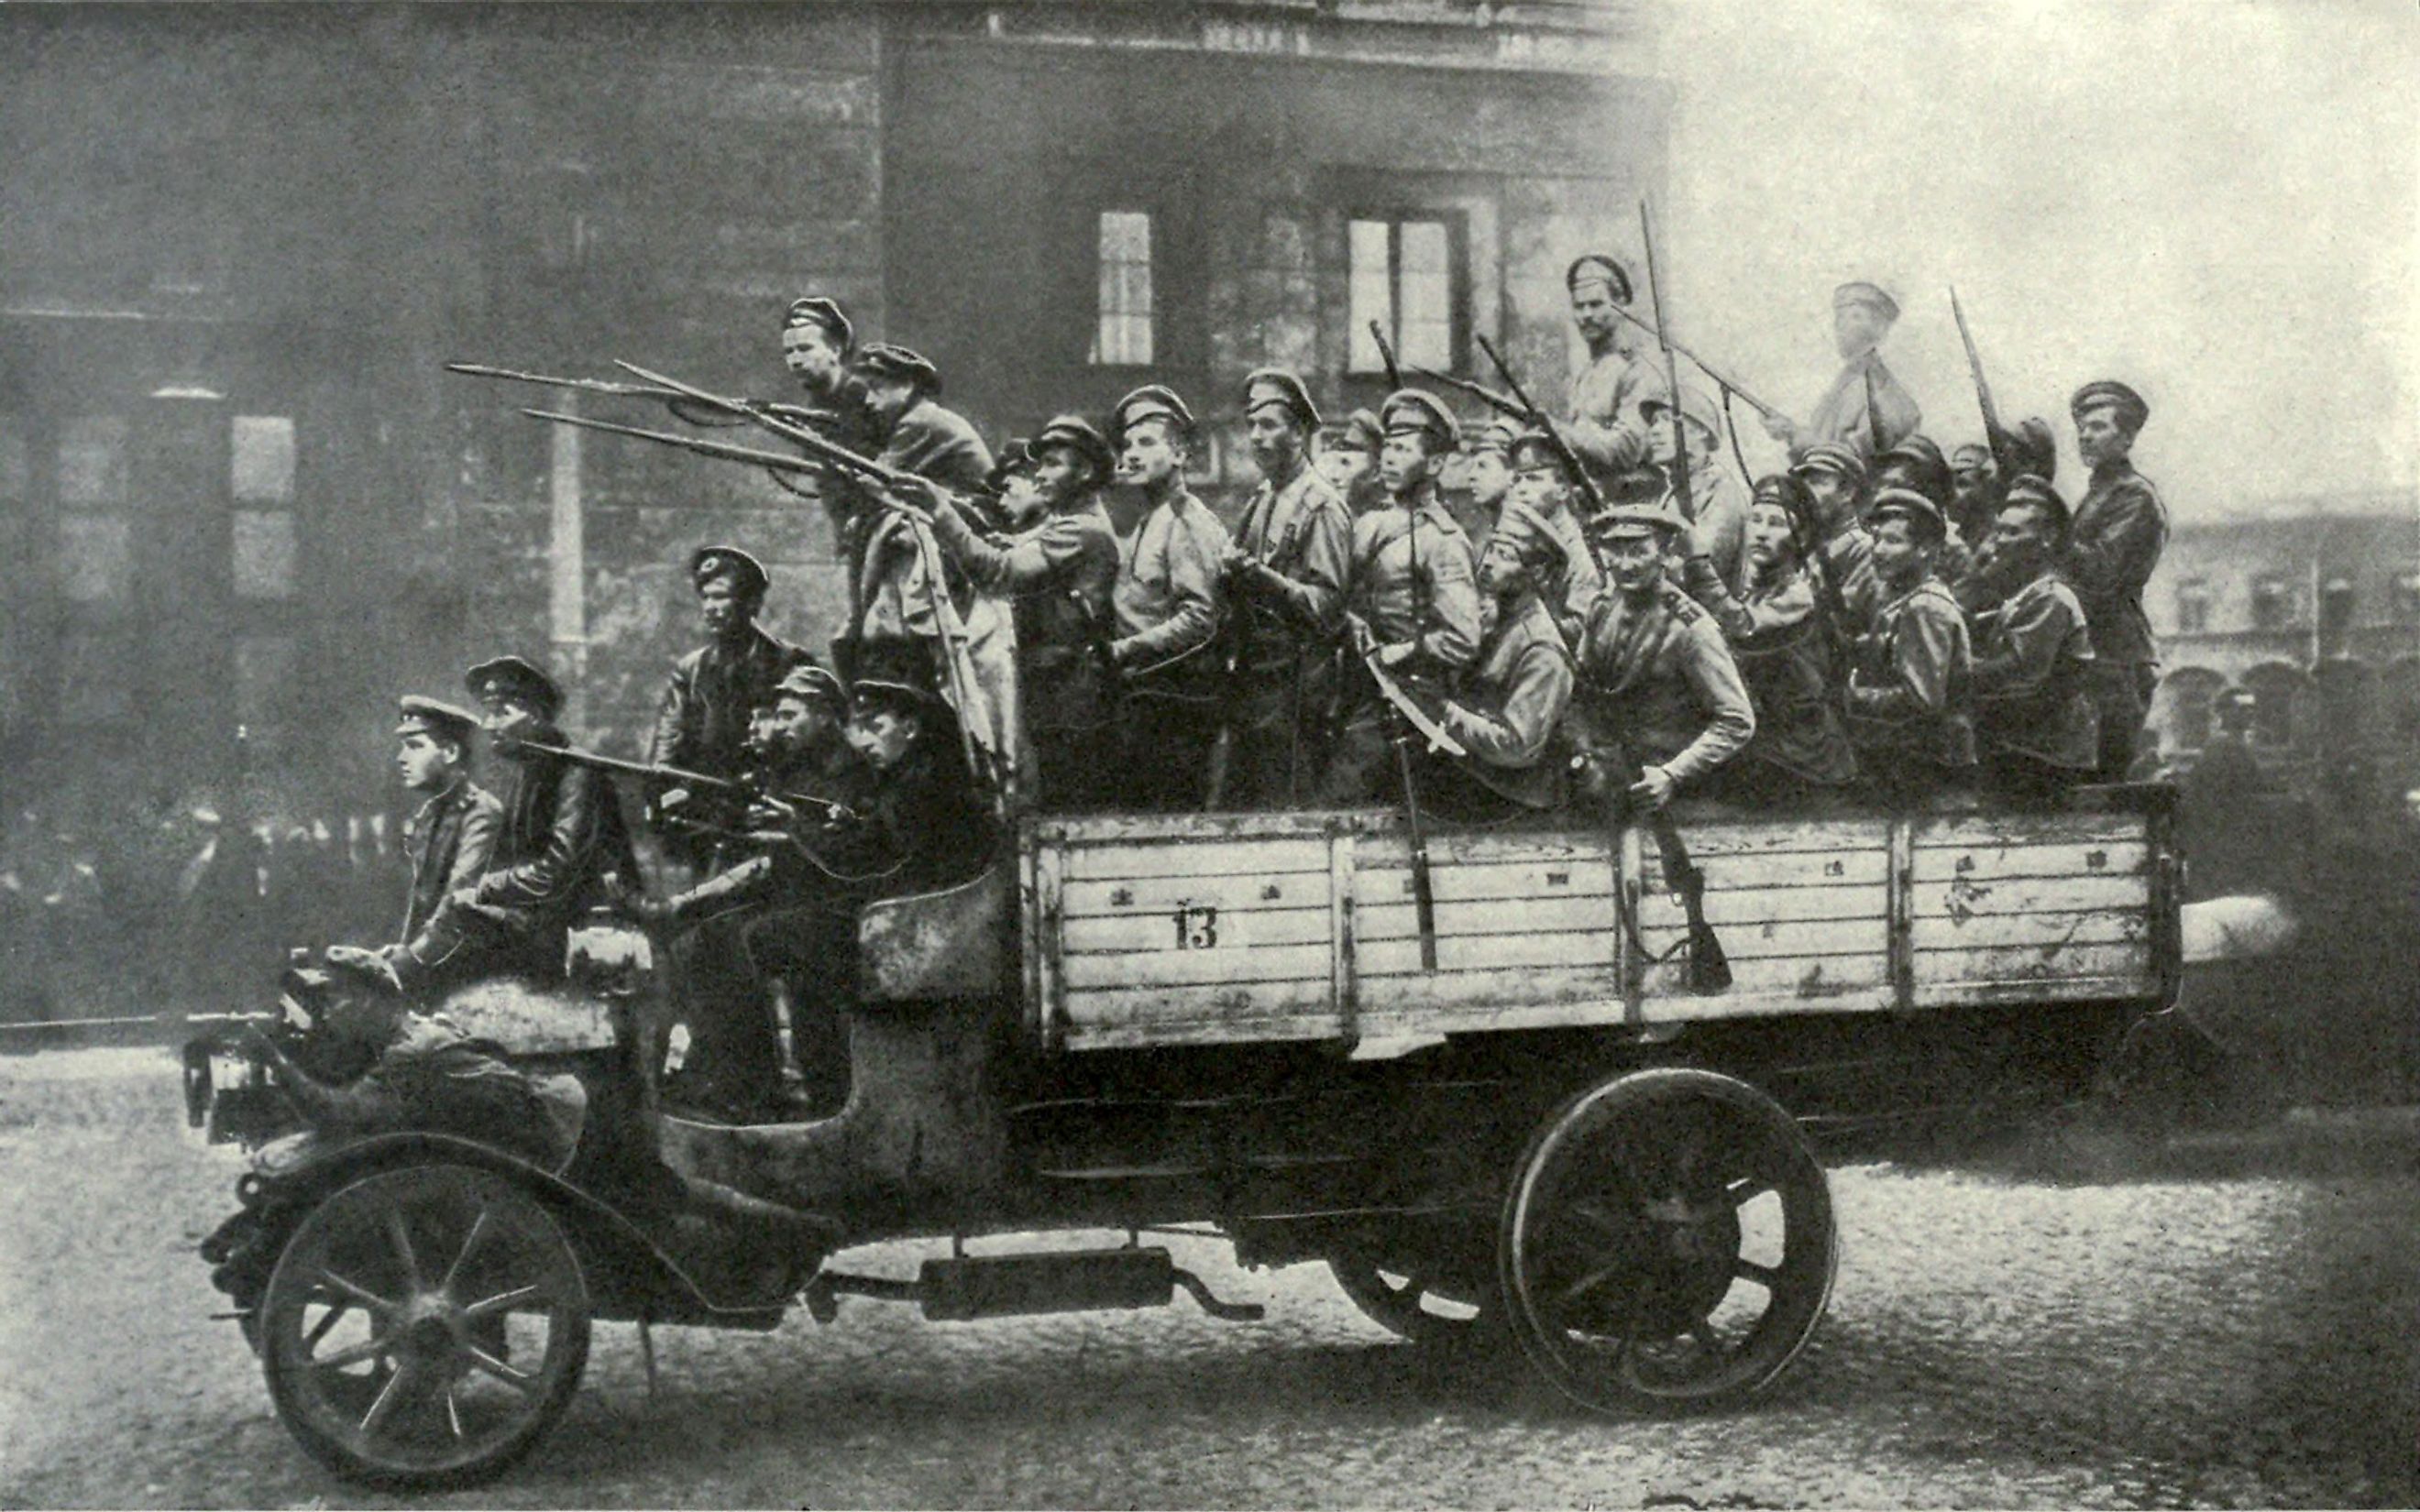 Truckload of excited soldiers during Russian Revolution. St. Petersburg, 1917.